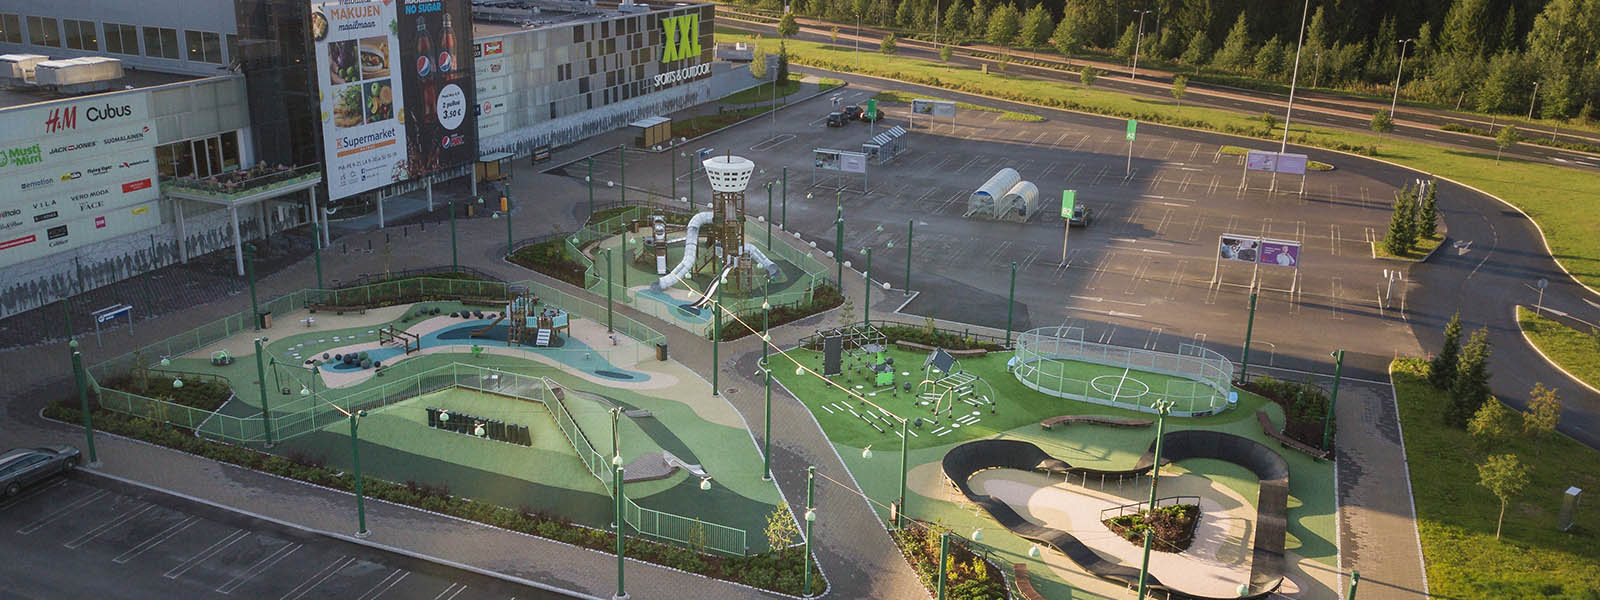 Activity park located in the yard of Matkus shopping center in Finland